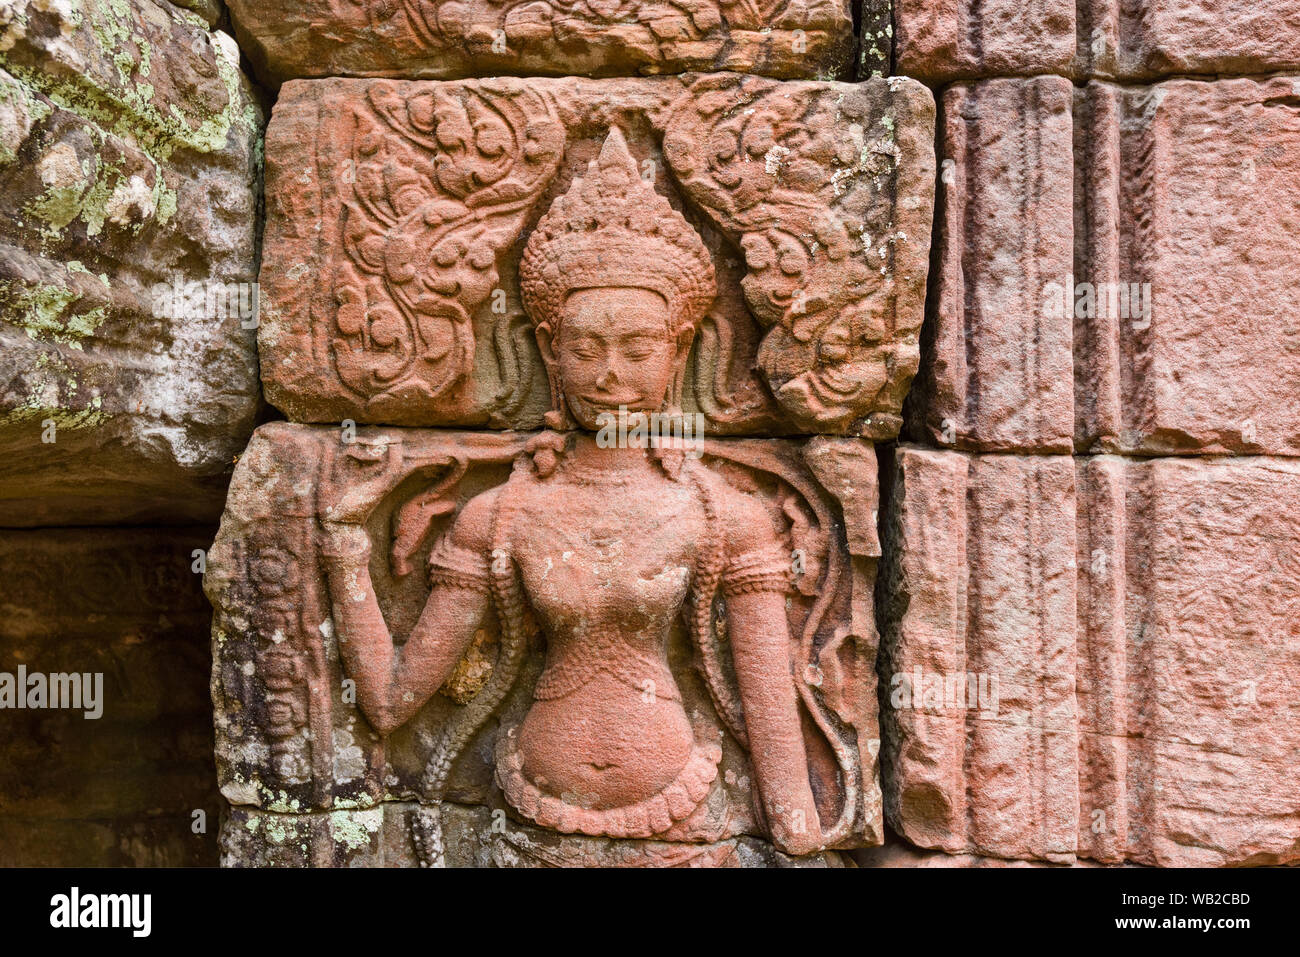 Devata are feminine deities or celestial nymphs with an enigmatic smile in Ta Prohm temple, Khmer ruins in Angkor Thom in Siem Reap Cambodia Stock Photo